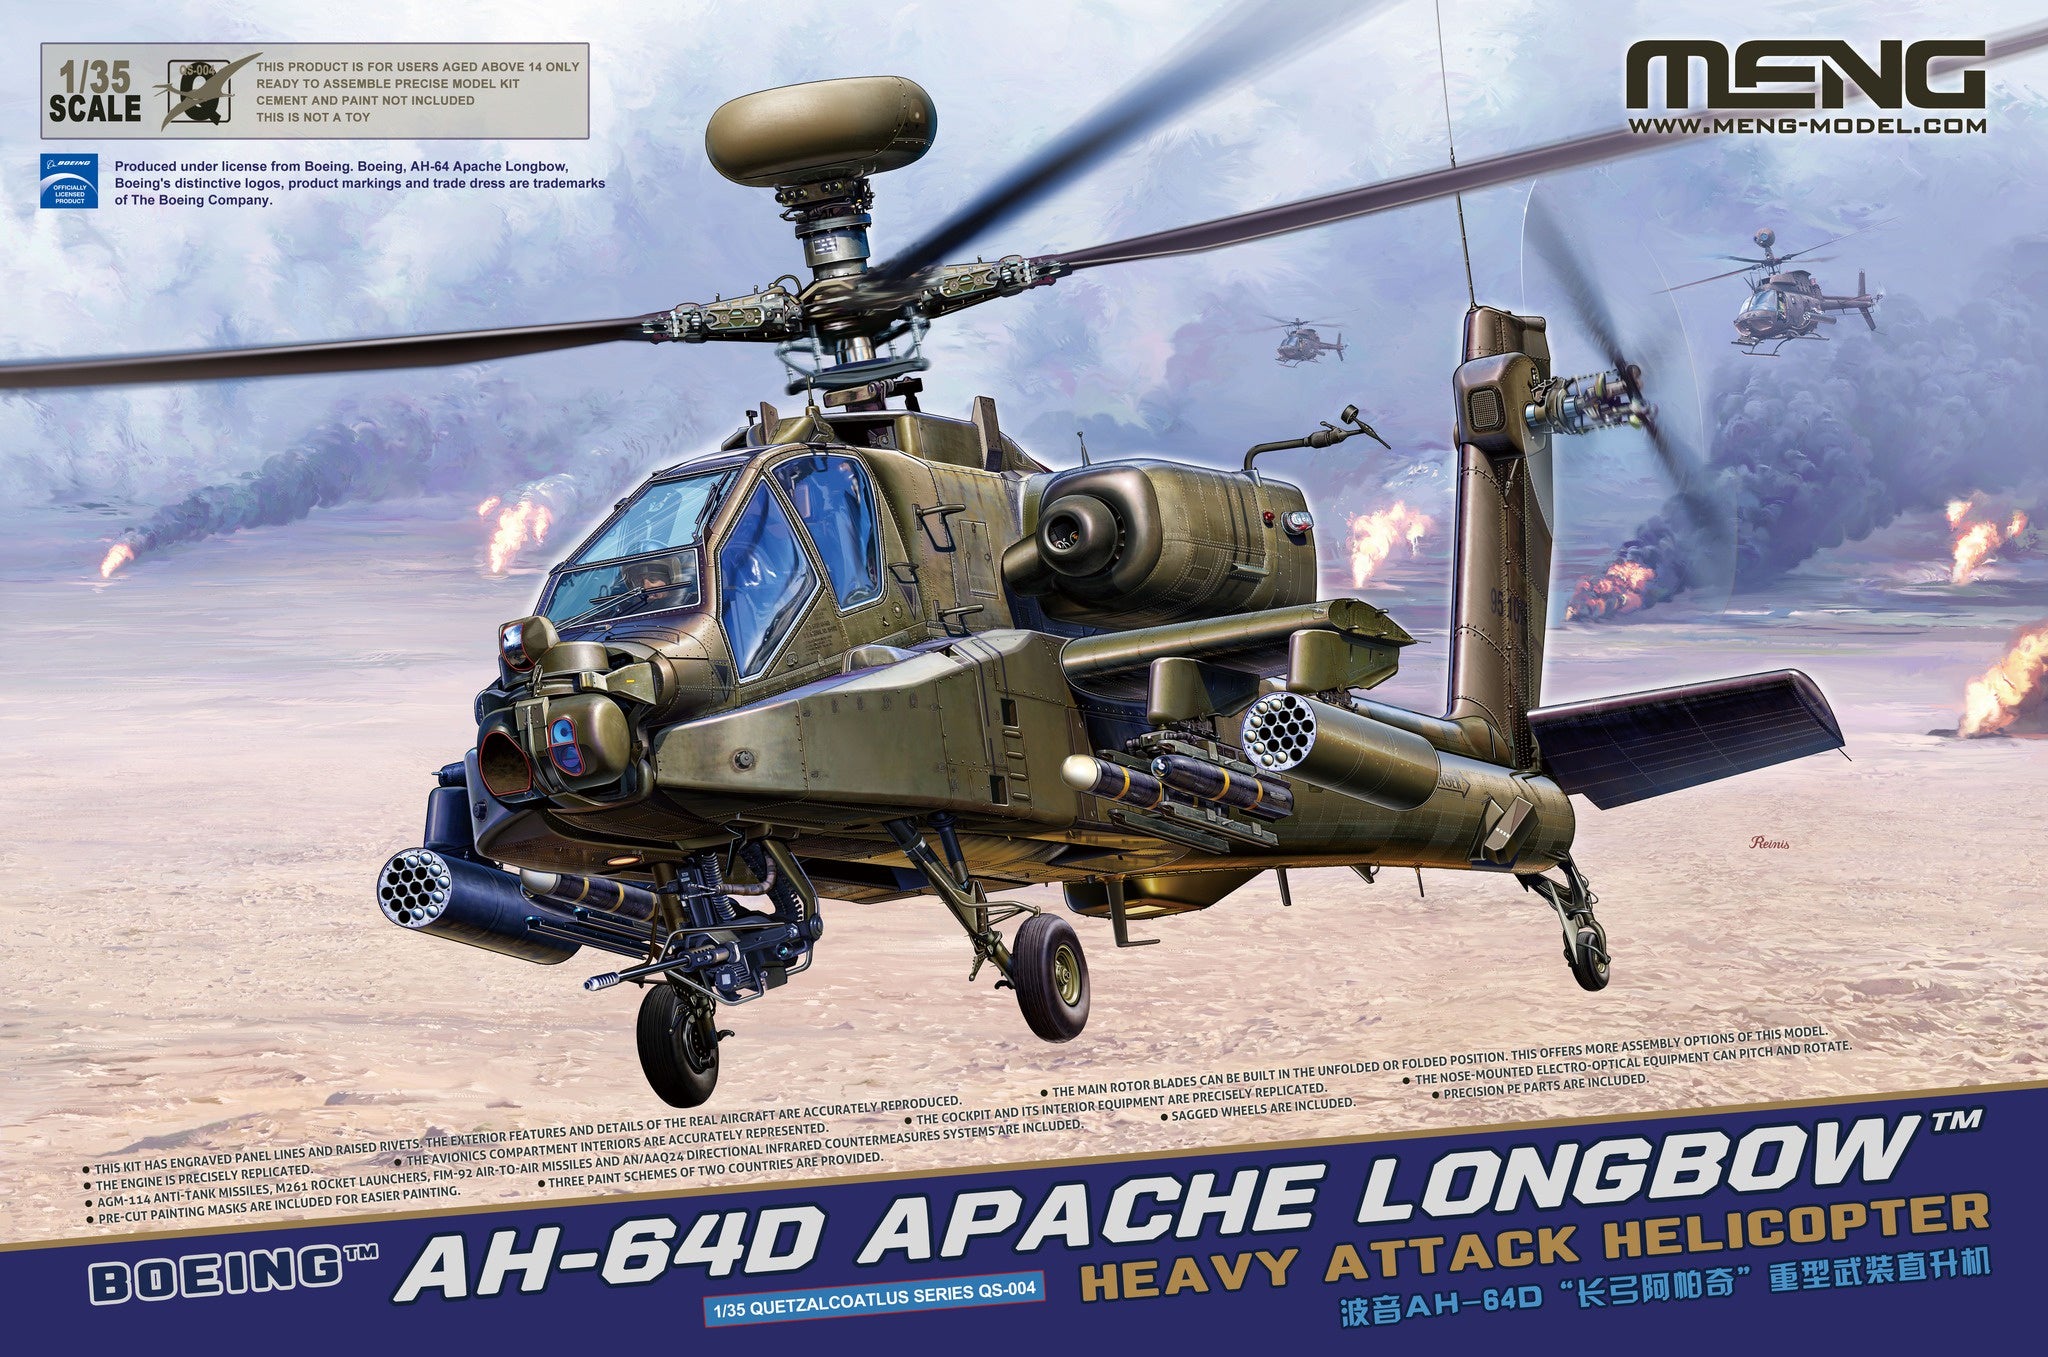 Boeing AH-64D Apache Longbow Heavy Attack Helicopter 1/35 #QS-004 by Meng